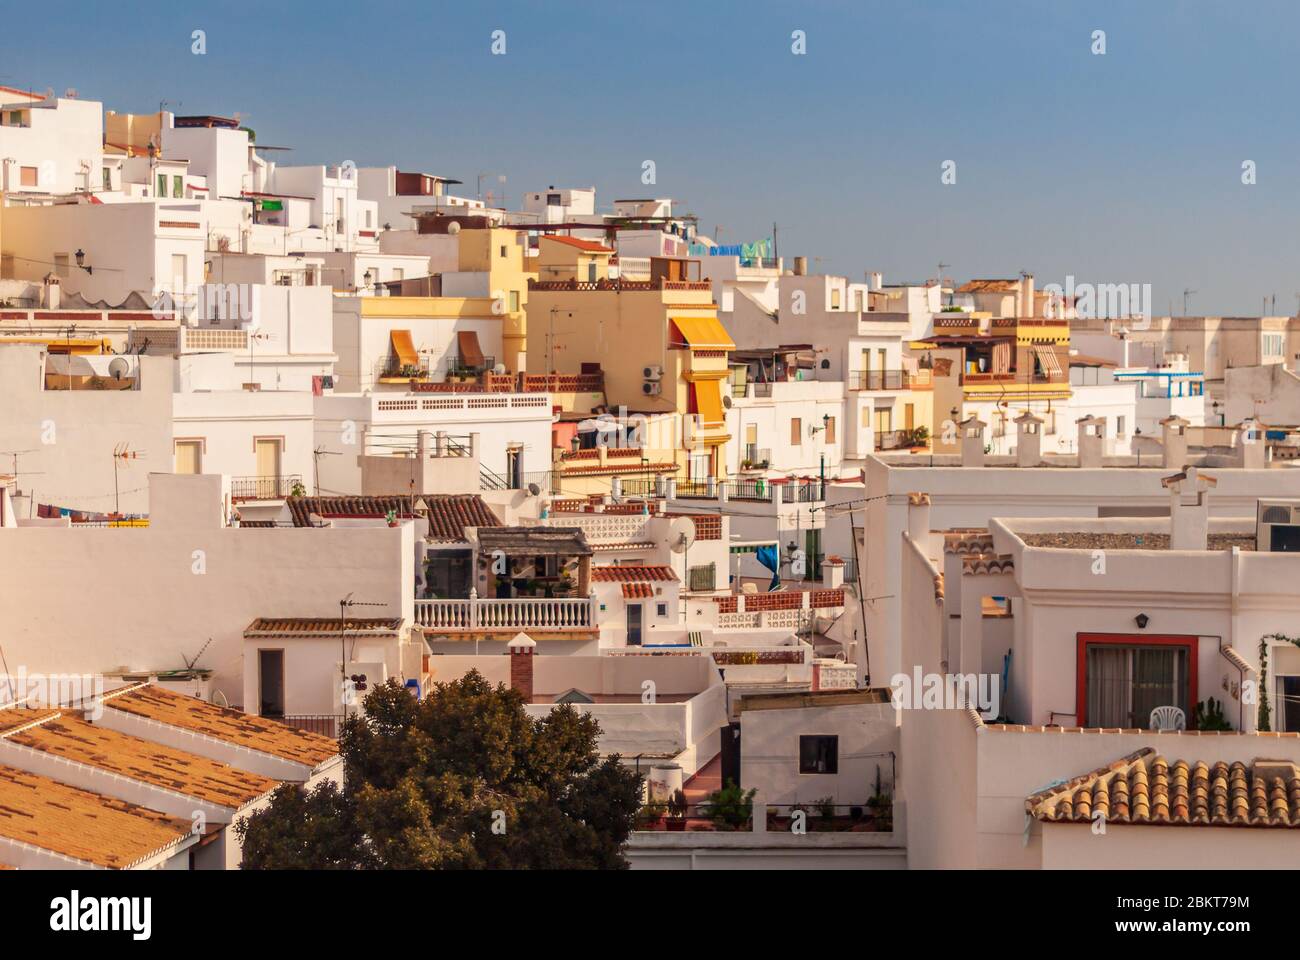 Looking across the roofs of houses and apartments in the golden sunlight at the Costa Tropical town of La Herradura, Granada, Spain Stock Photo